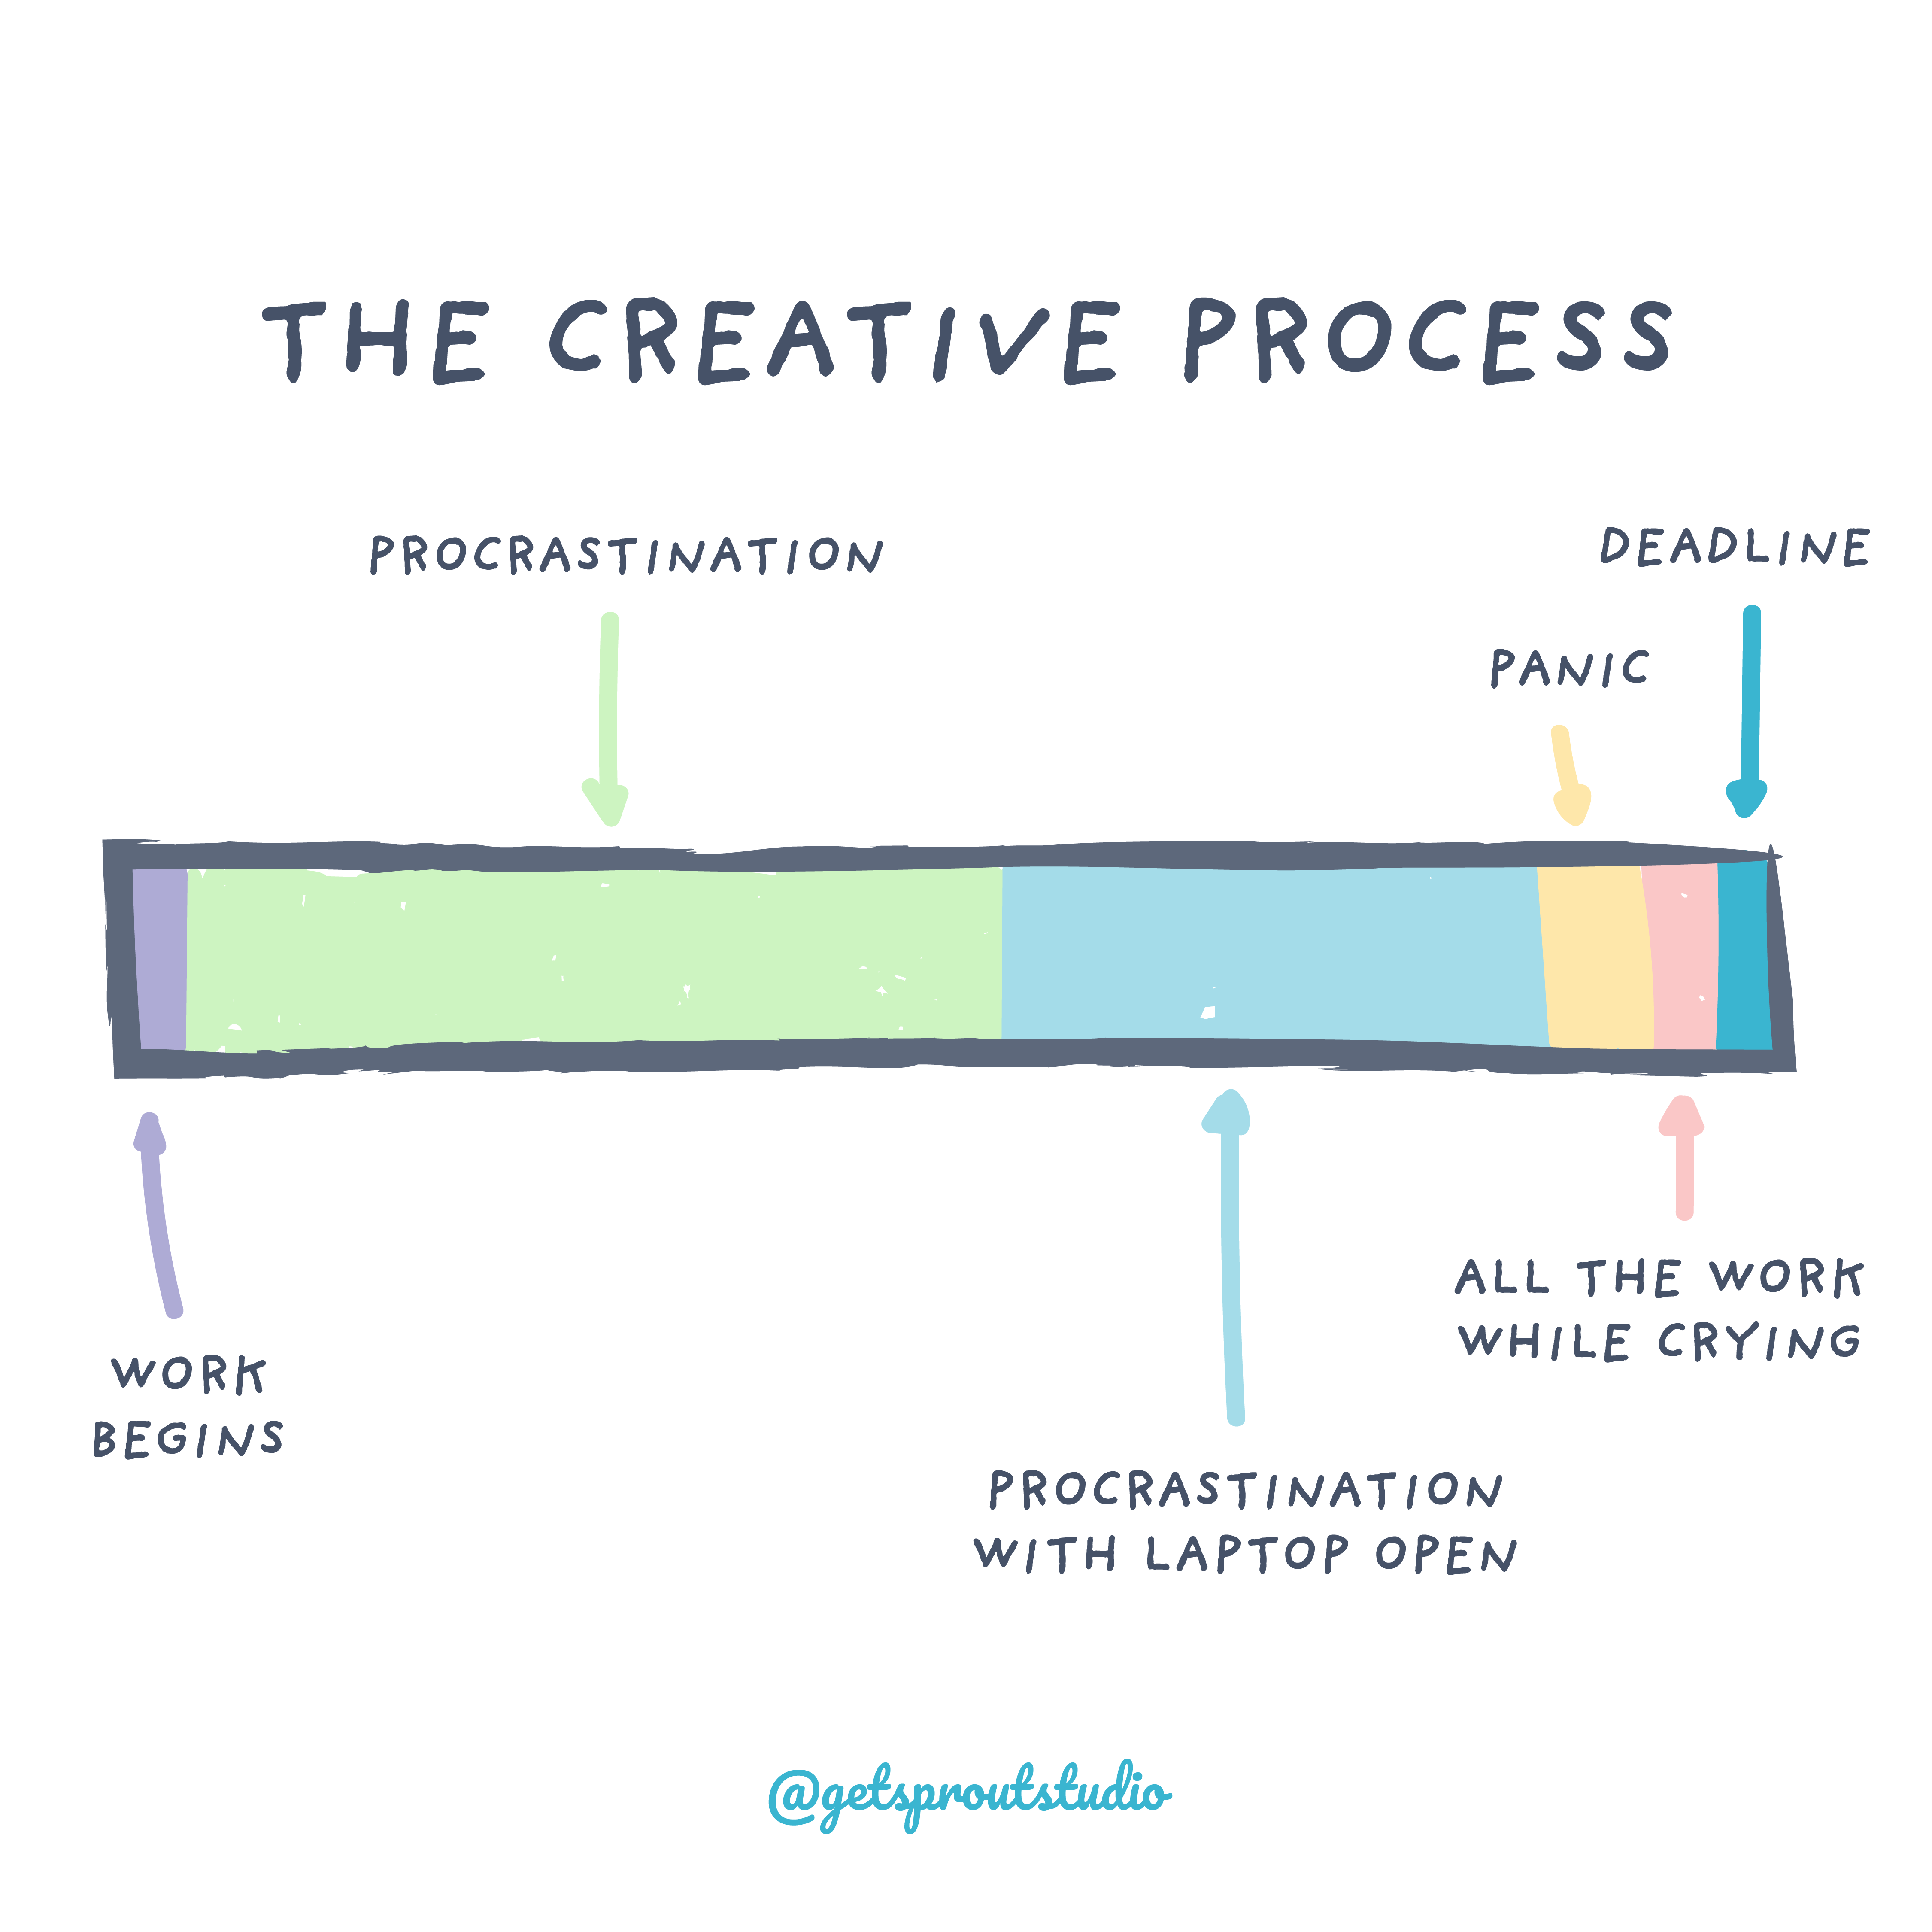 The Creative Process, outlined